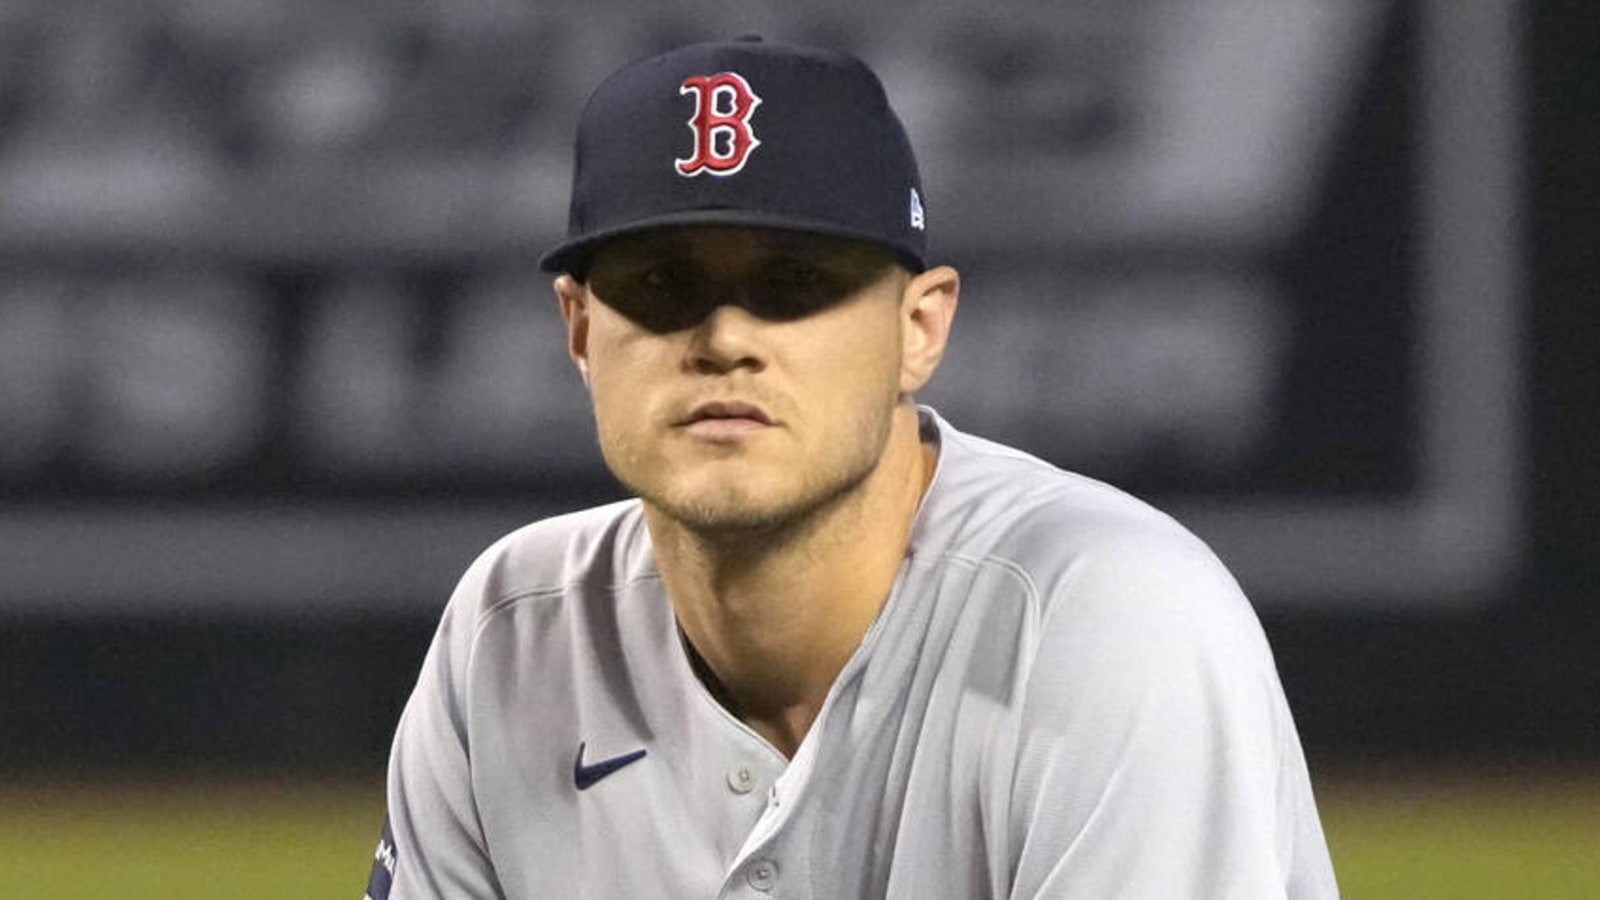 Red Sox starting pitcher to undergo surgery for facial fracture